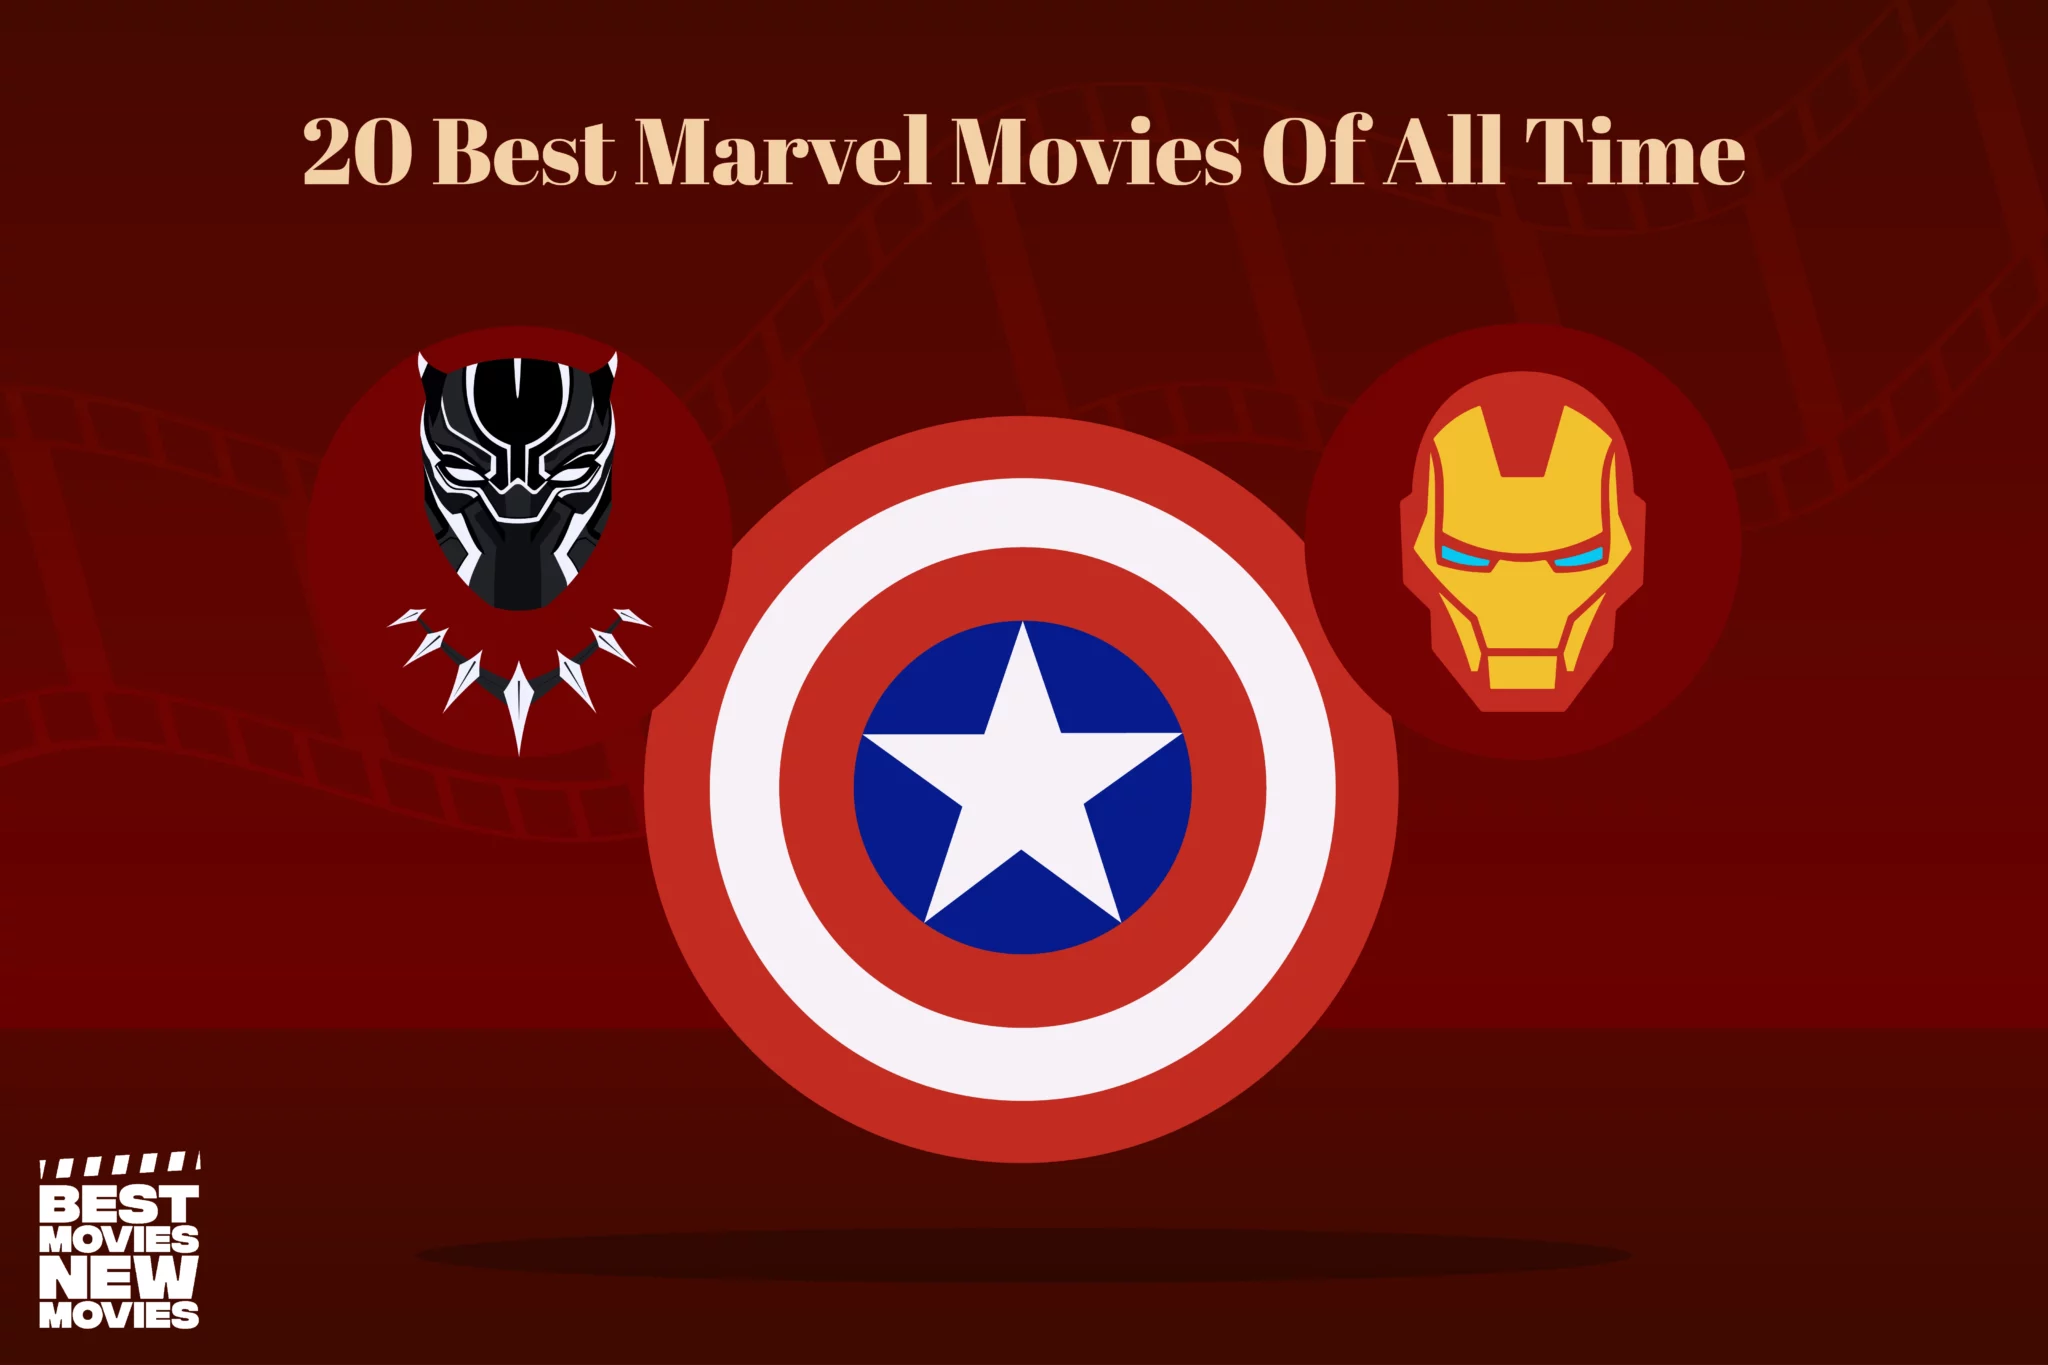 20 Best Marvel Movies Of All Time